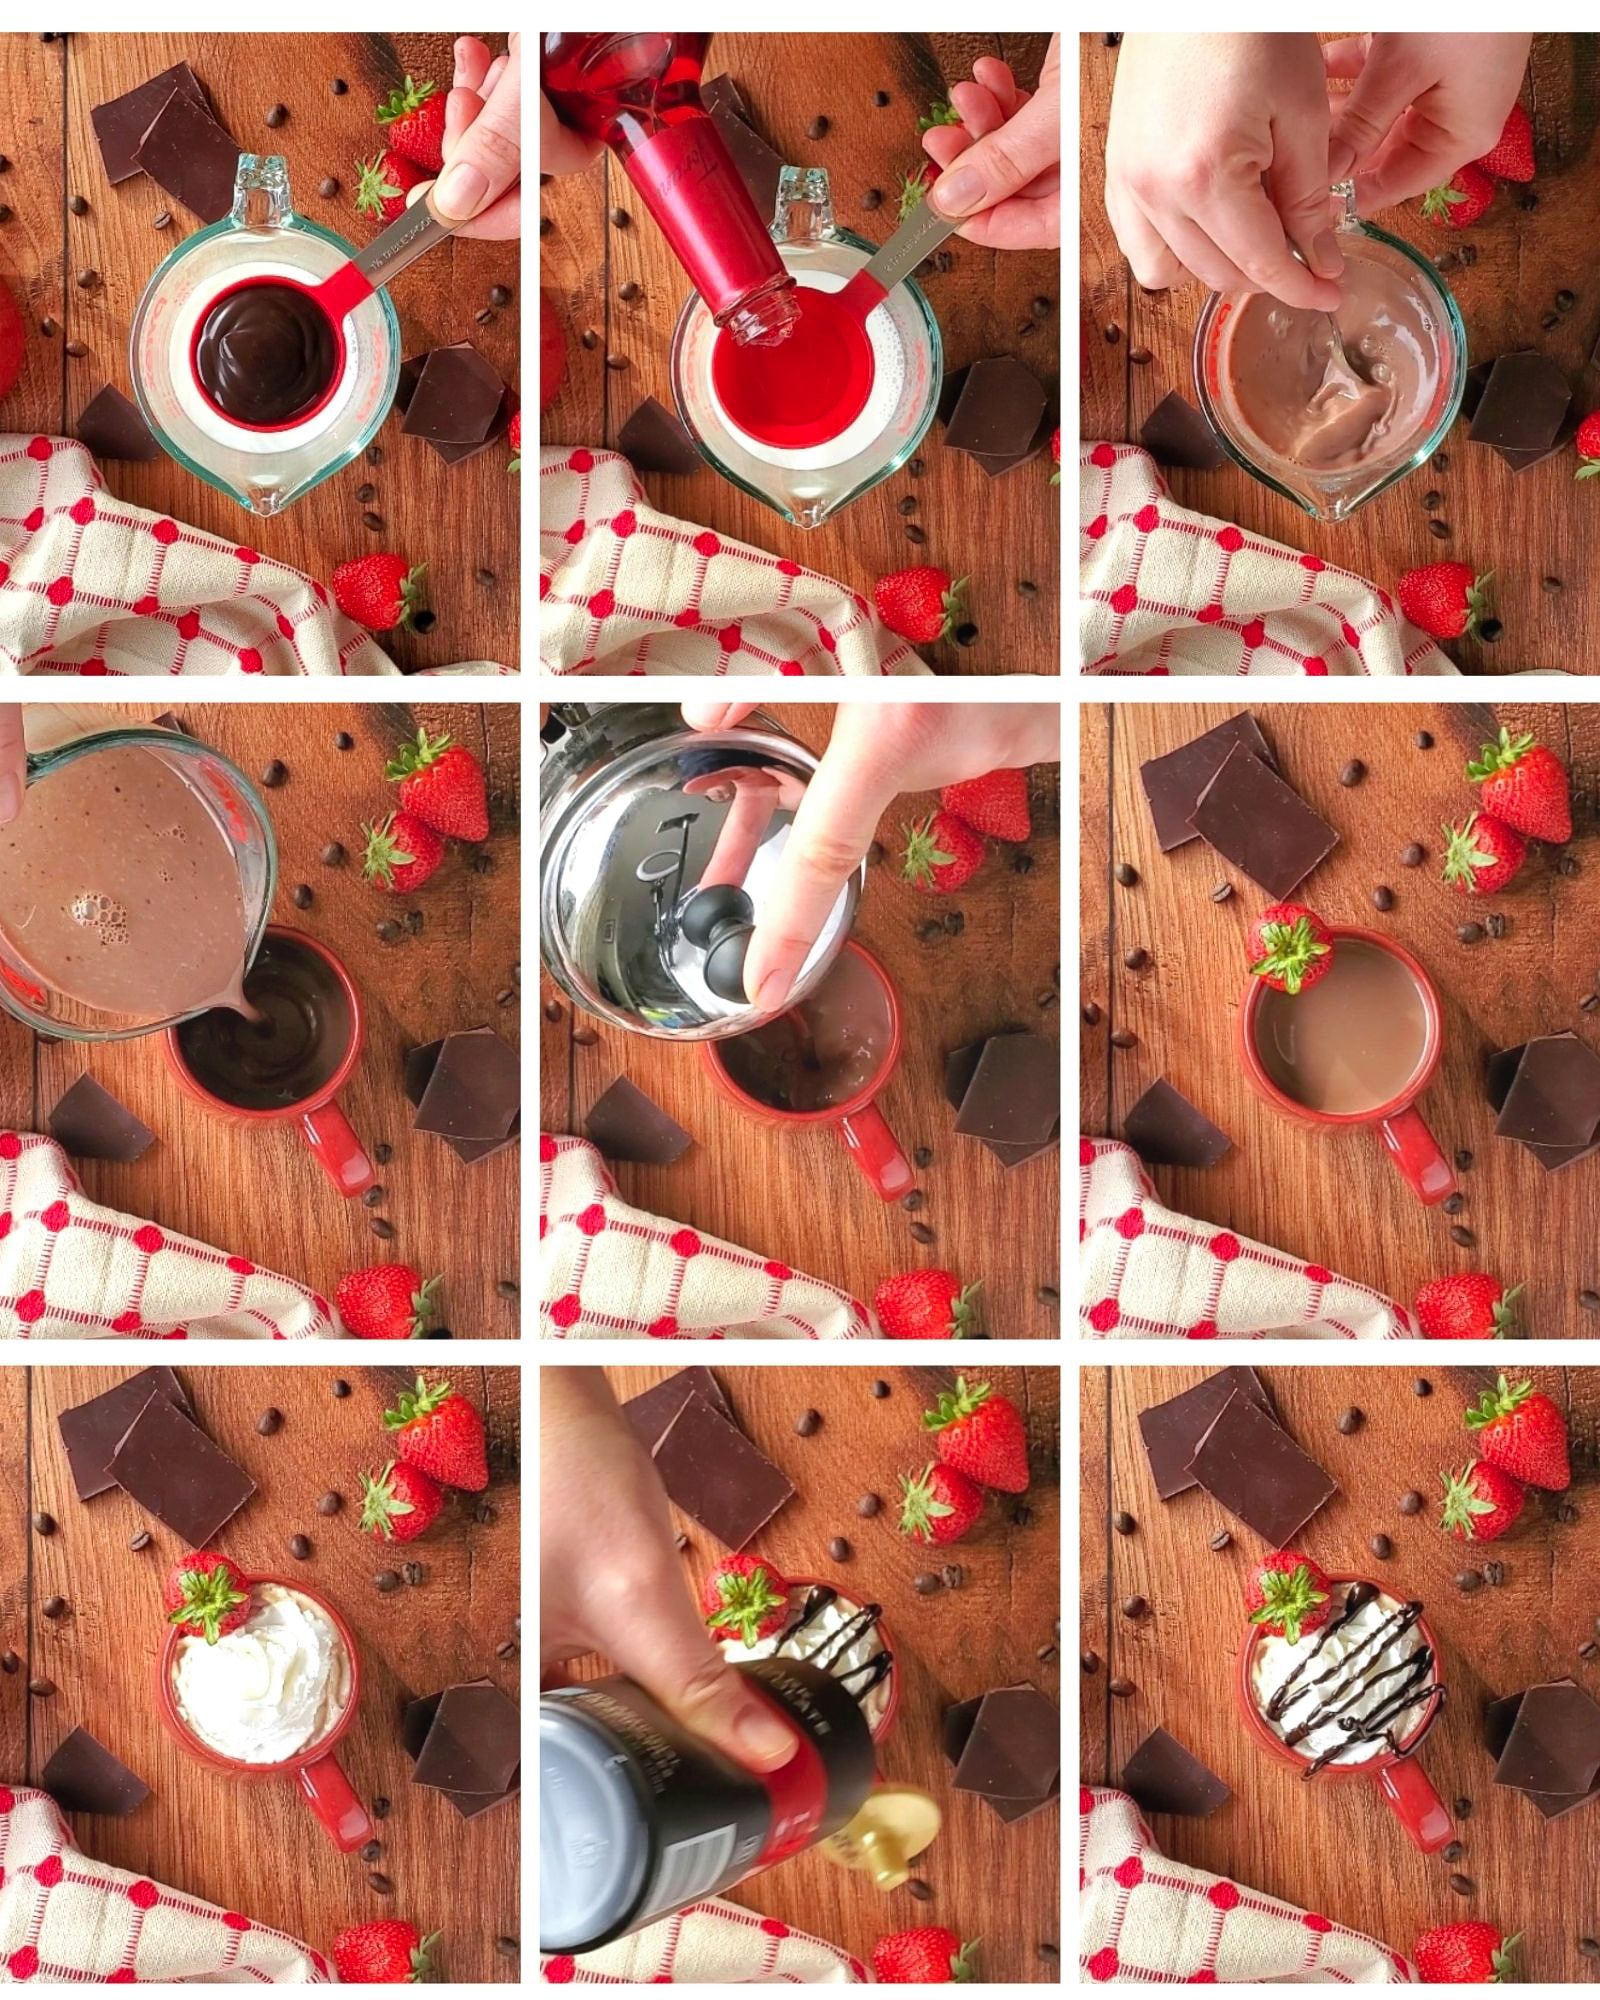 9 image collage showing you how to make this valentines chocolate covered strawberries coffee step-by-step.